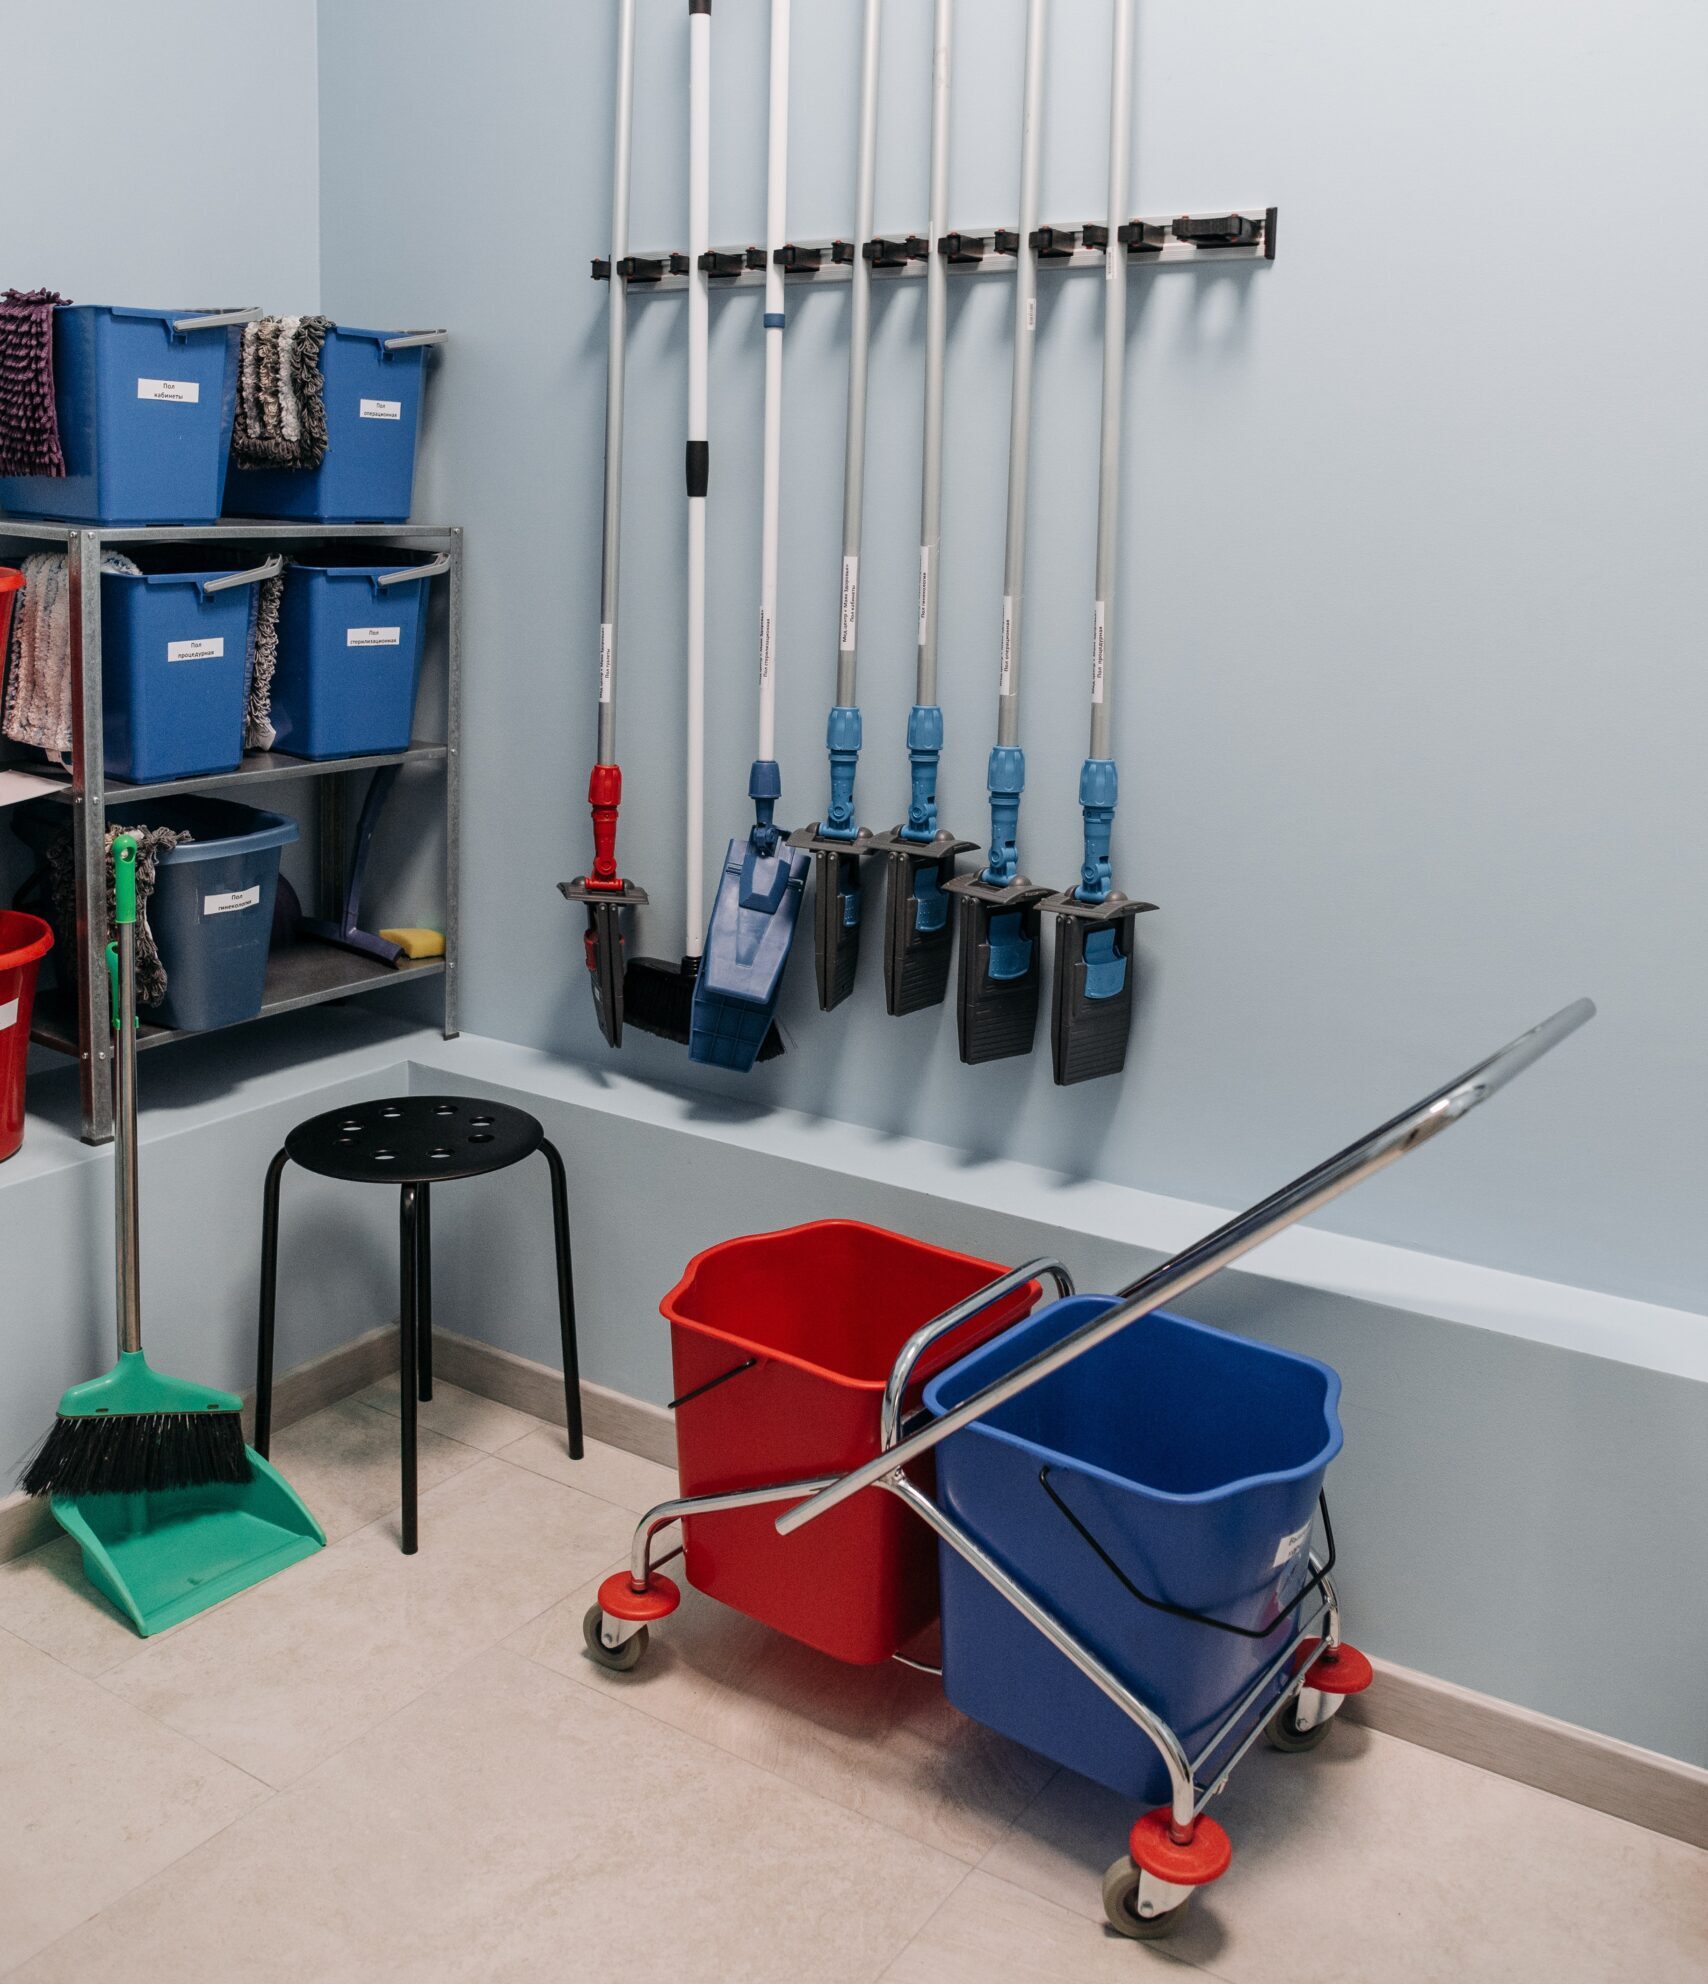 Indianapolis Janitorial Service cleaning products